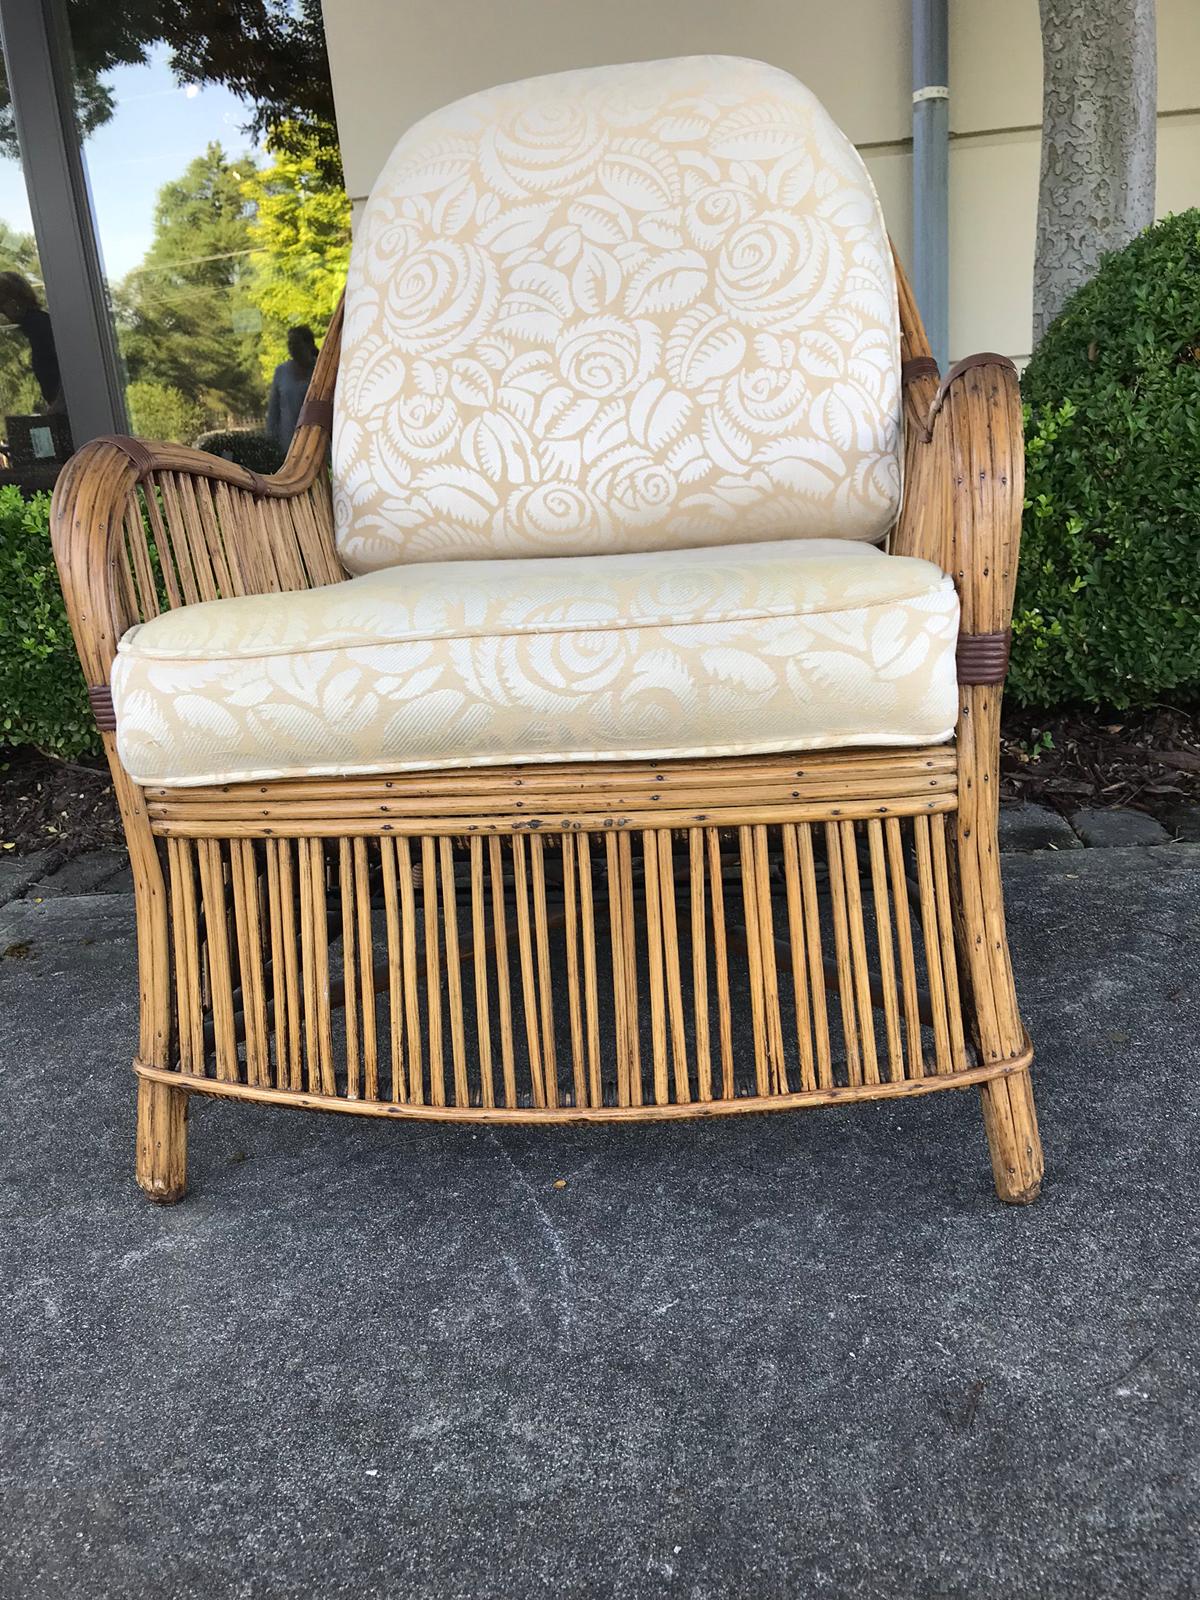 Early 20th Century Reed Armchair with Upholstered Seat and Back 4